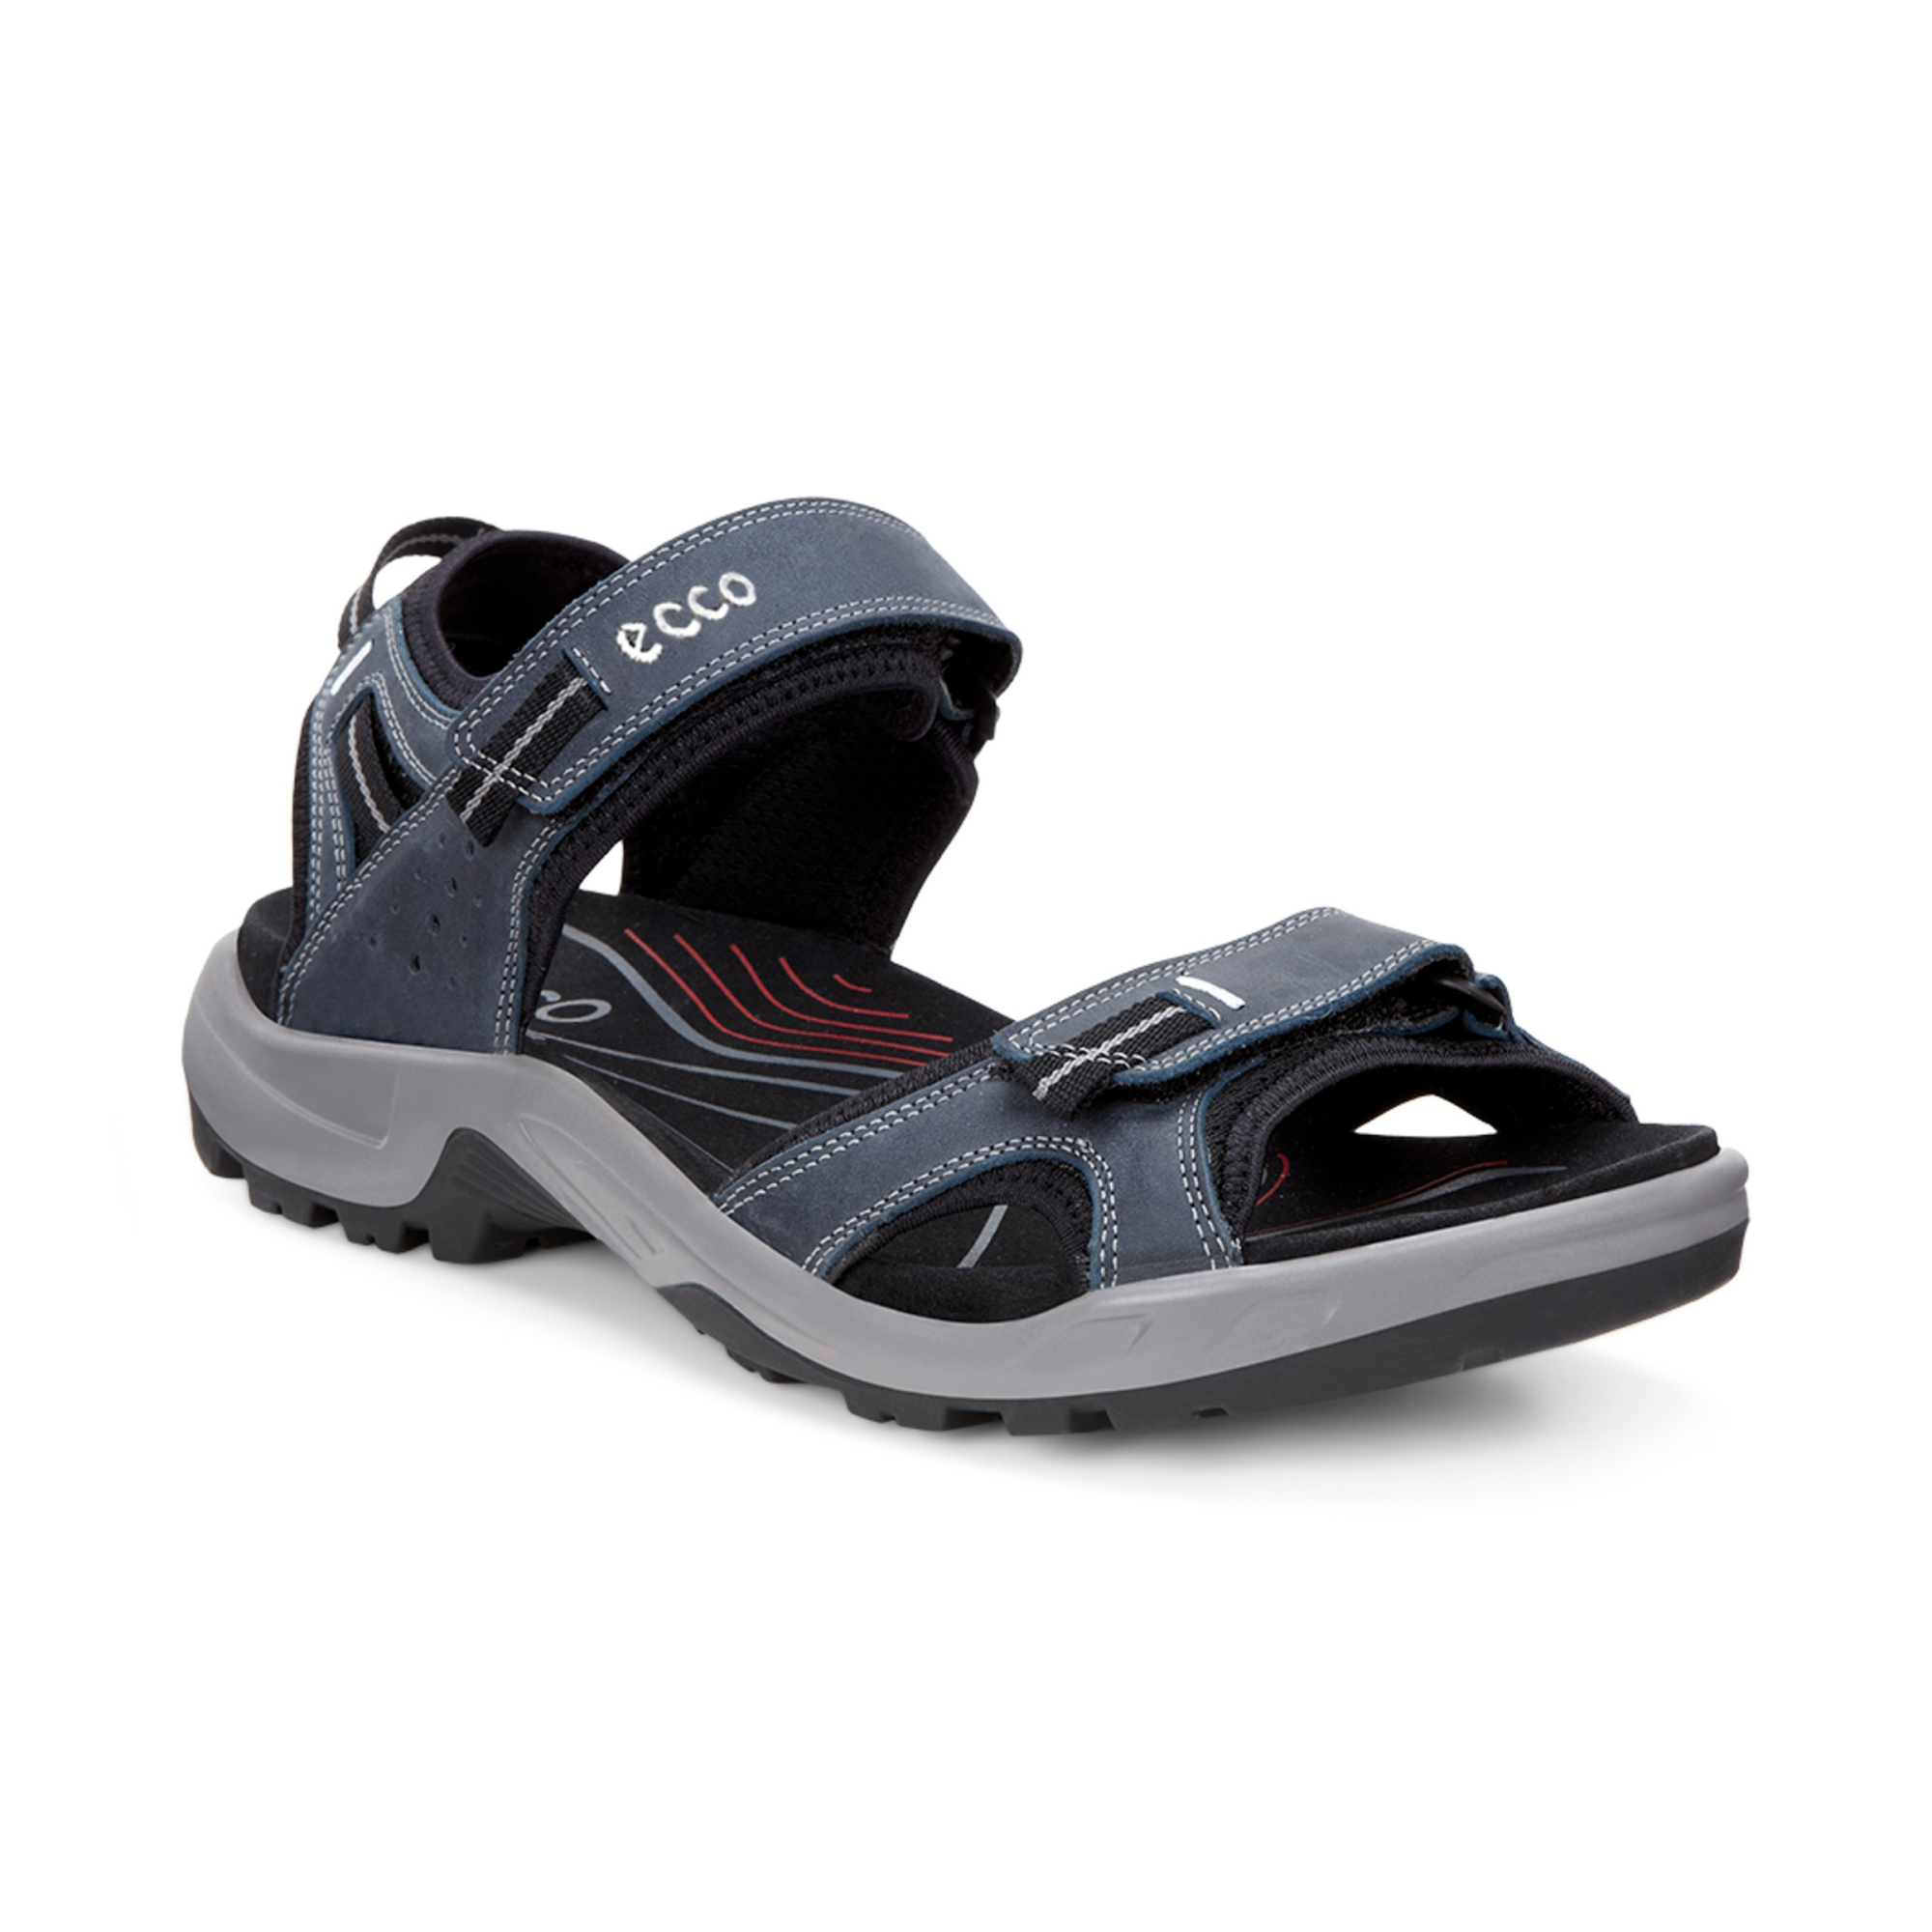 Sprællemand Waterfront Traditionel Ecco OFFROAD Flat Sandal 43 - Products - Veryk Mall - Veryk Mall, many  product, quick response, safe your money!